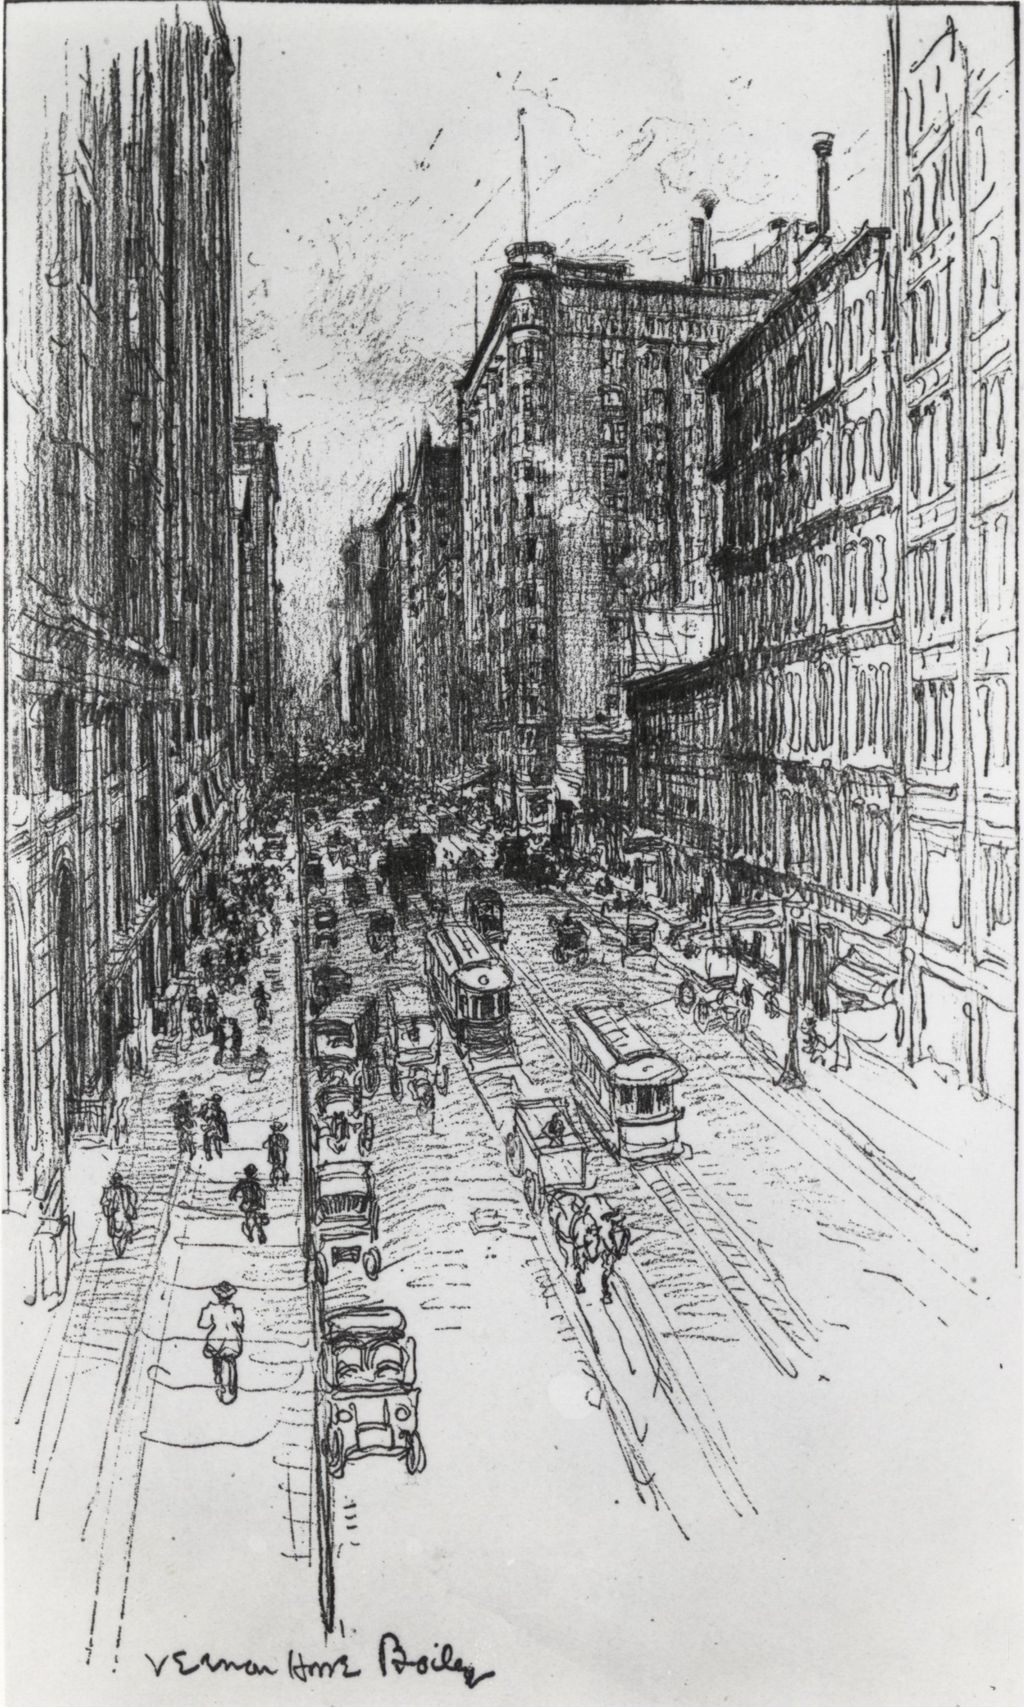 Miniature of "Dearborn Street" drawing by Vernon Howe Bailey